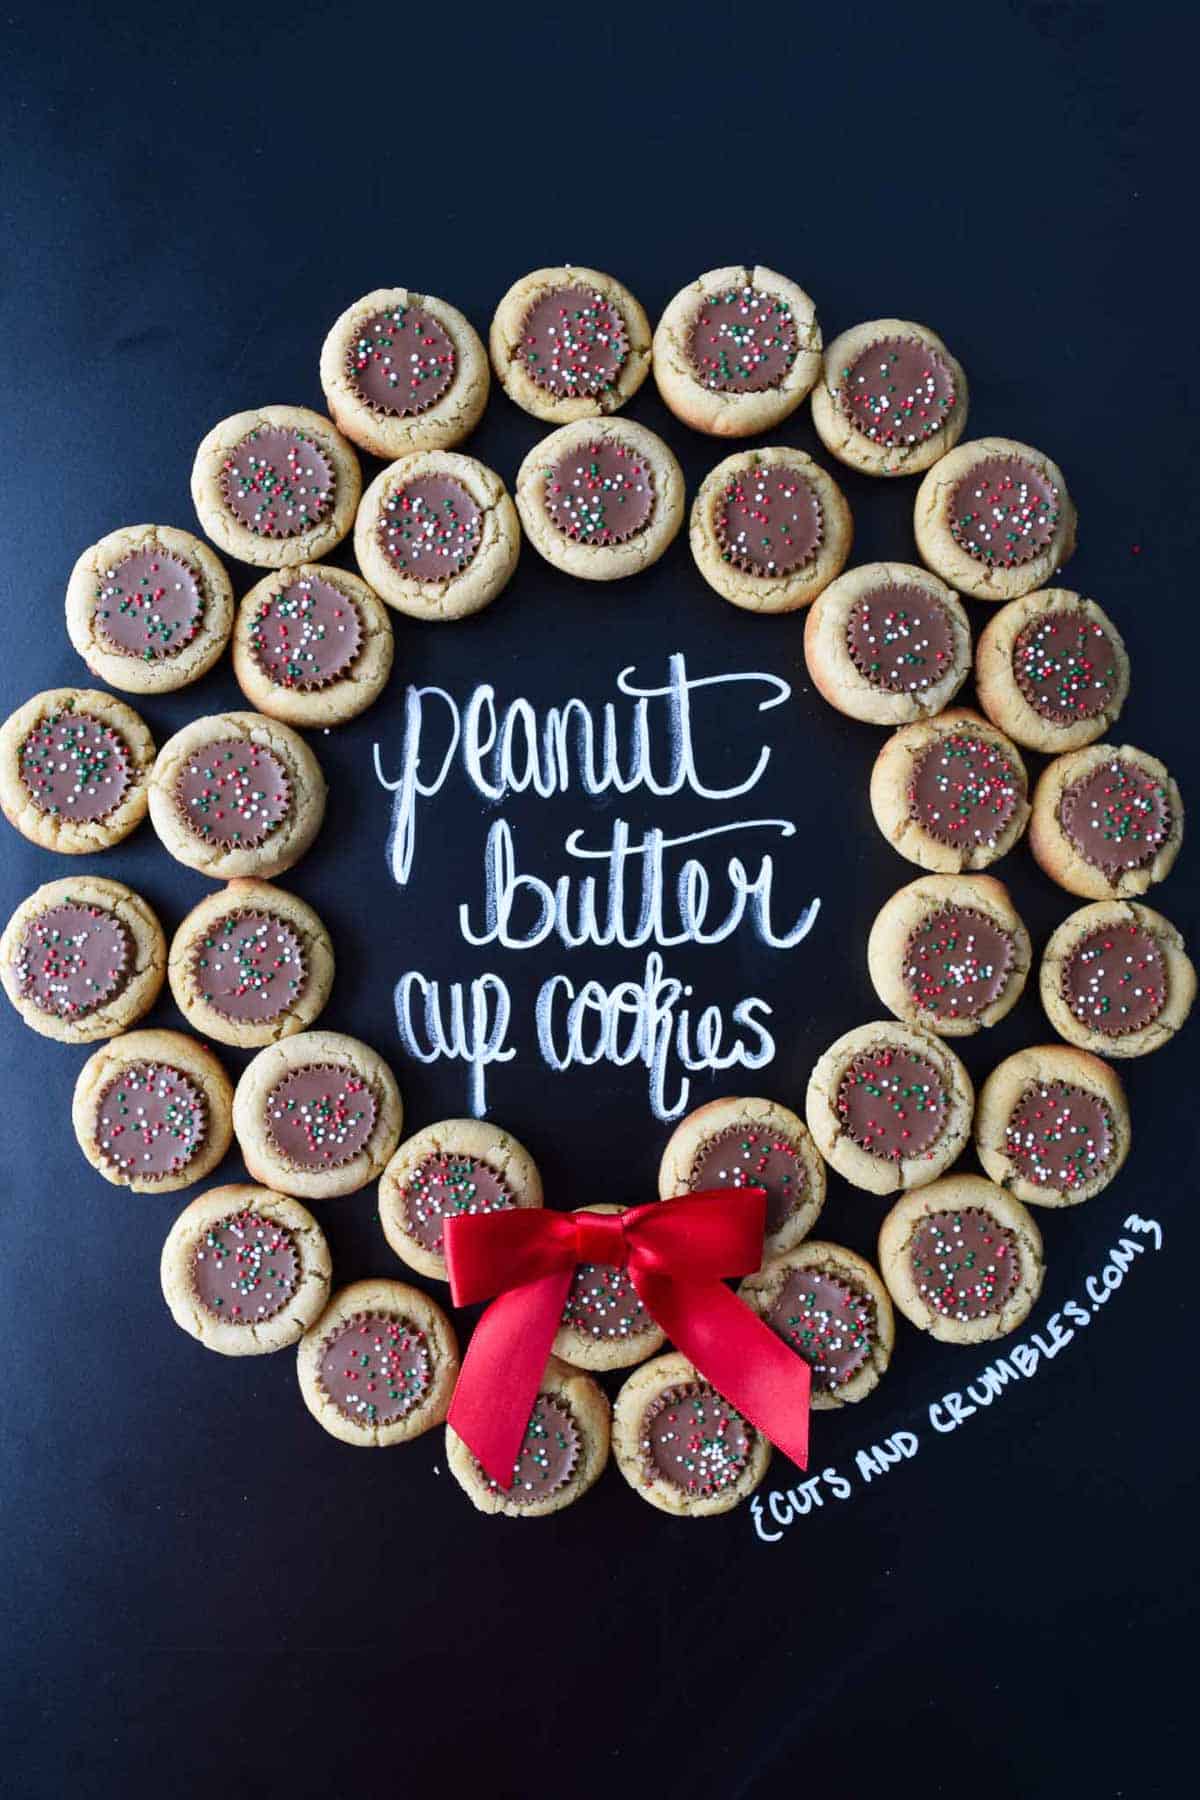 peanut butter cup cookies placed in shape of a wreath with title written on chalkboard